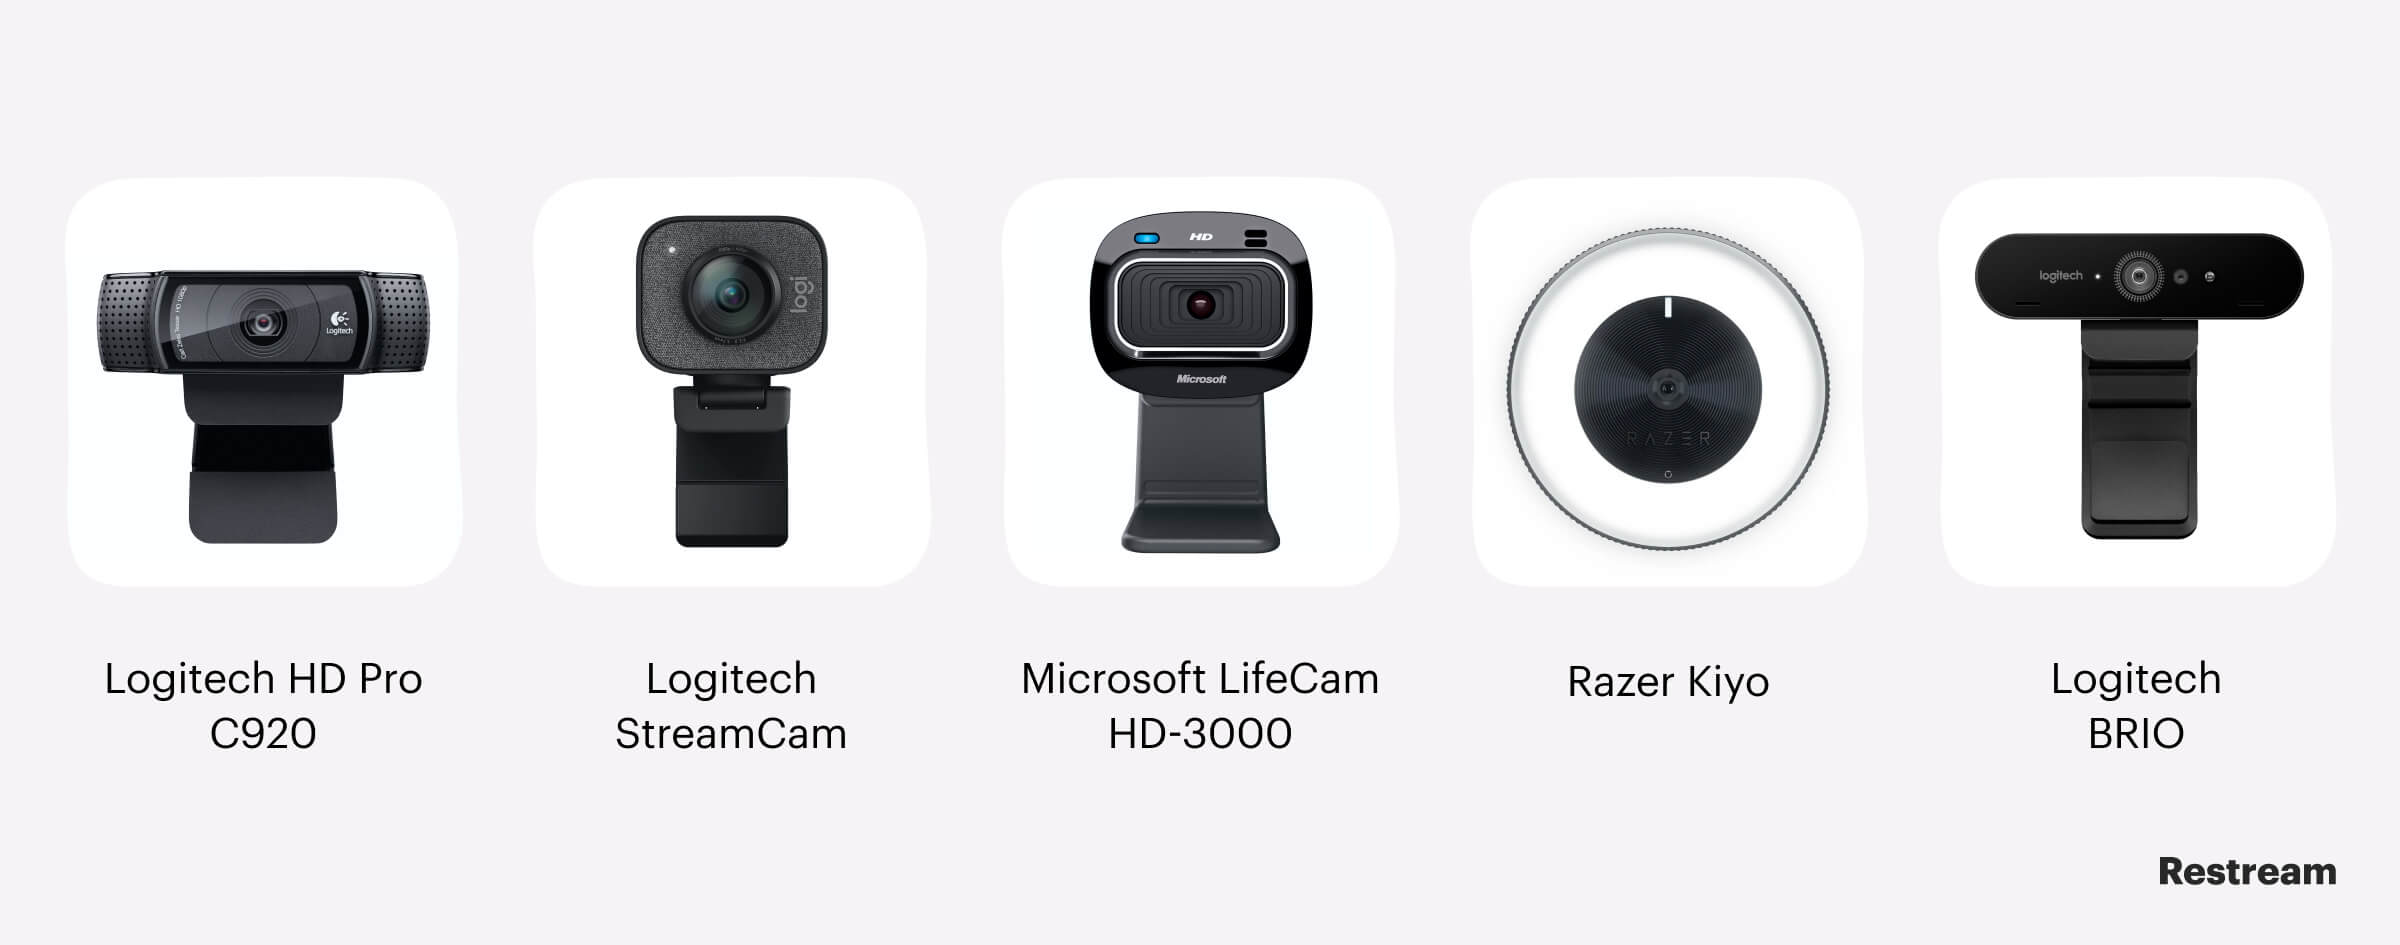 Best webcams for streaming on Twitch